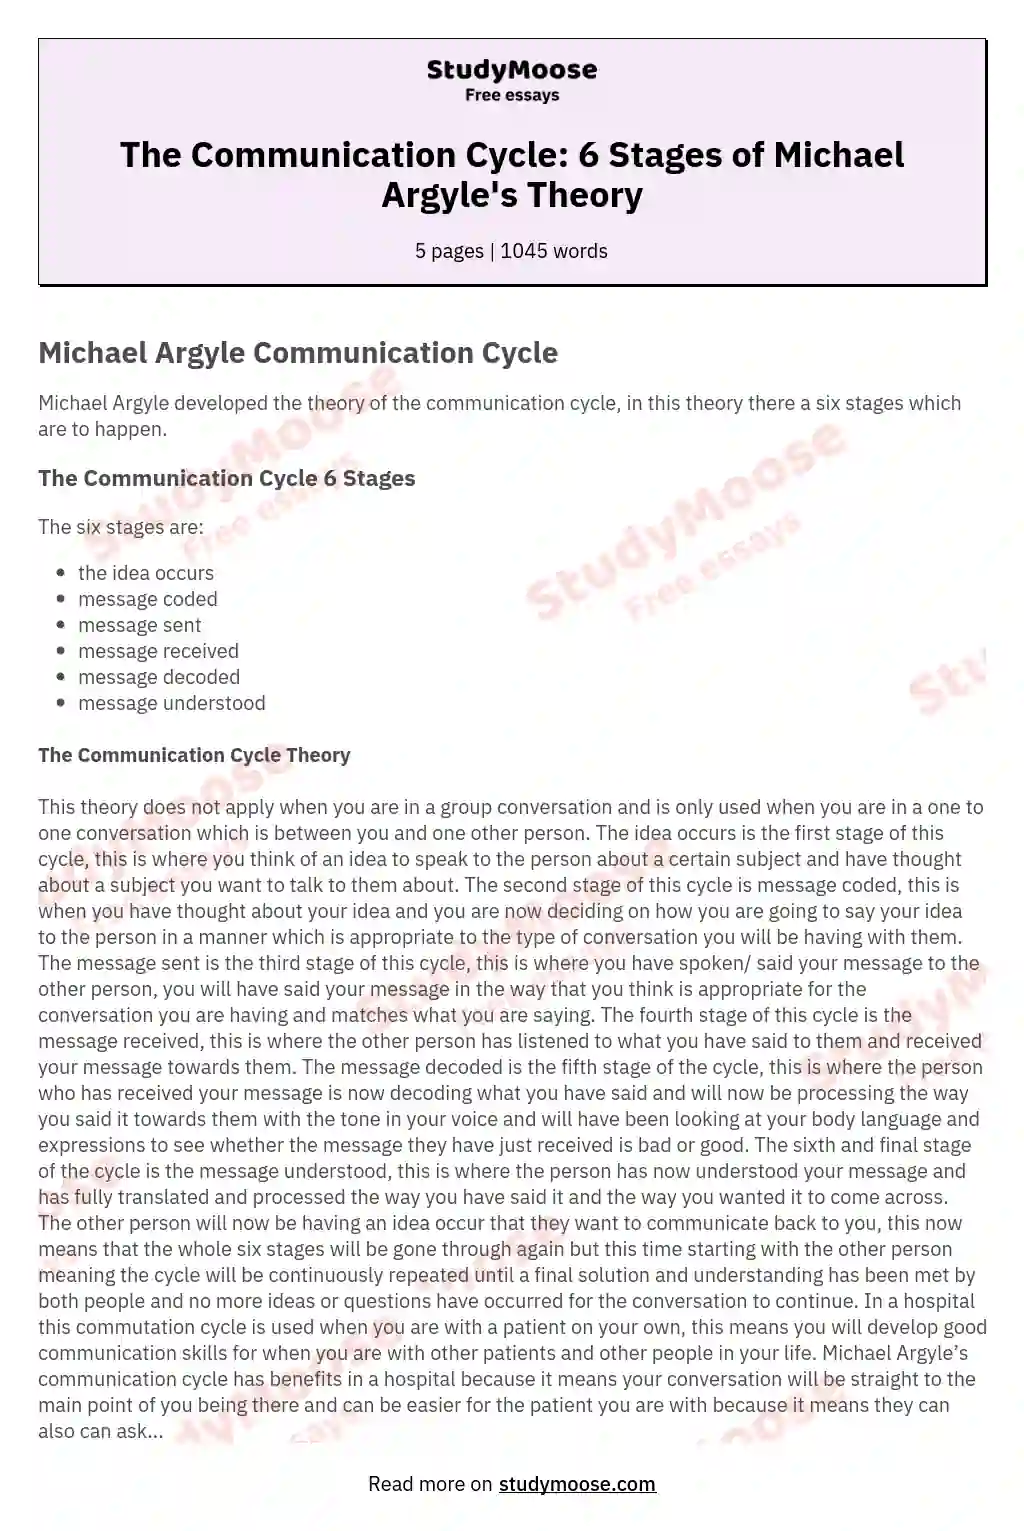 The Communication Cycle: 6 Stages of Michael Argyle's Theory